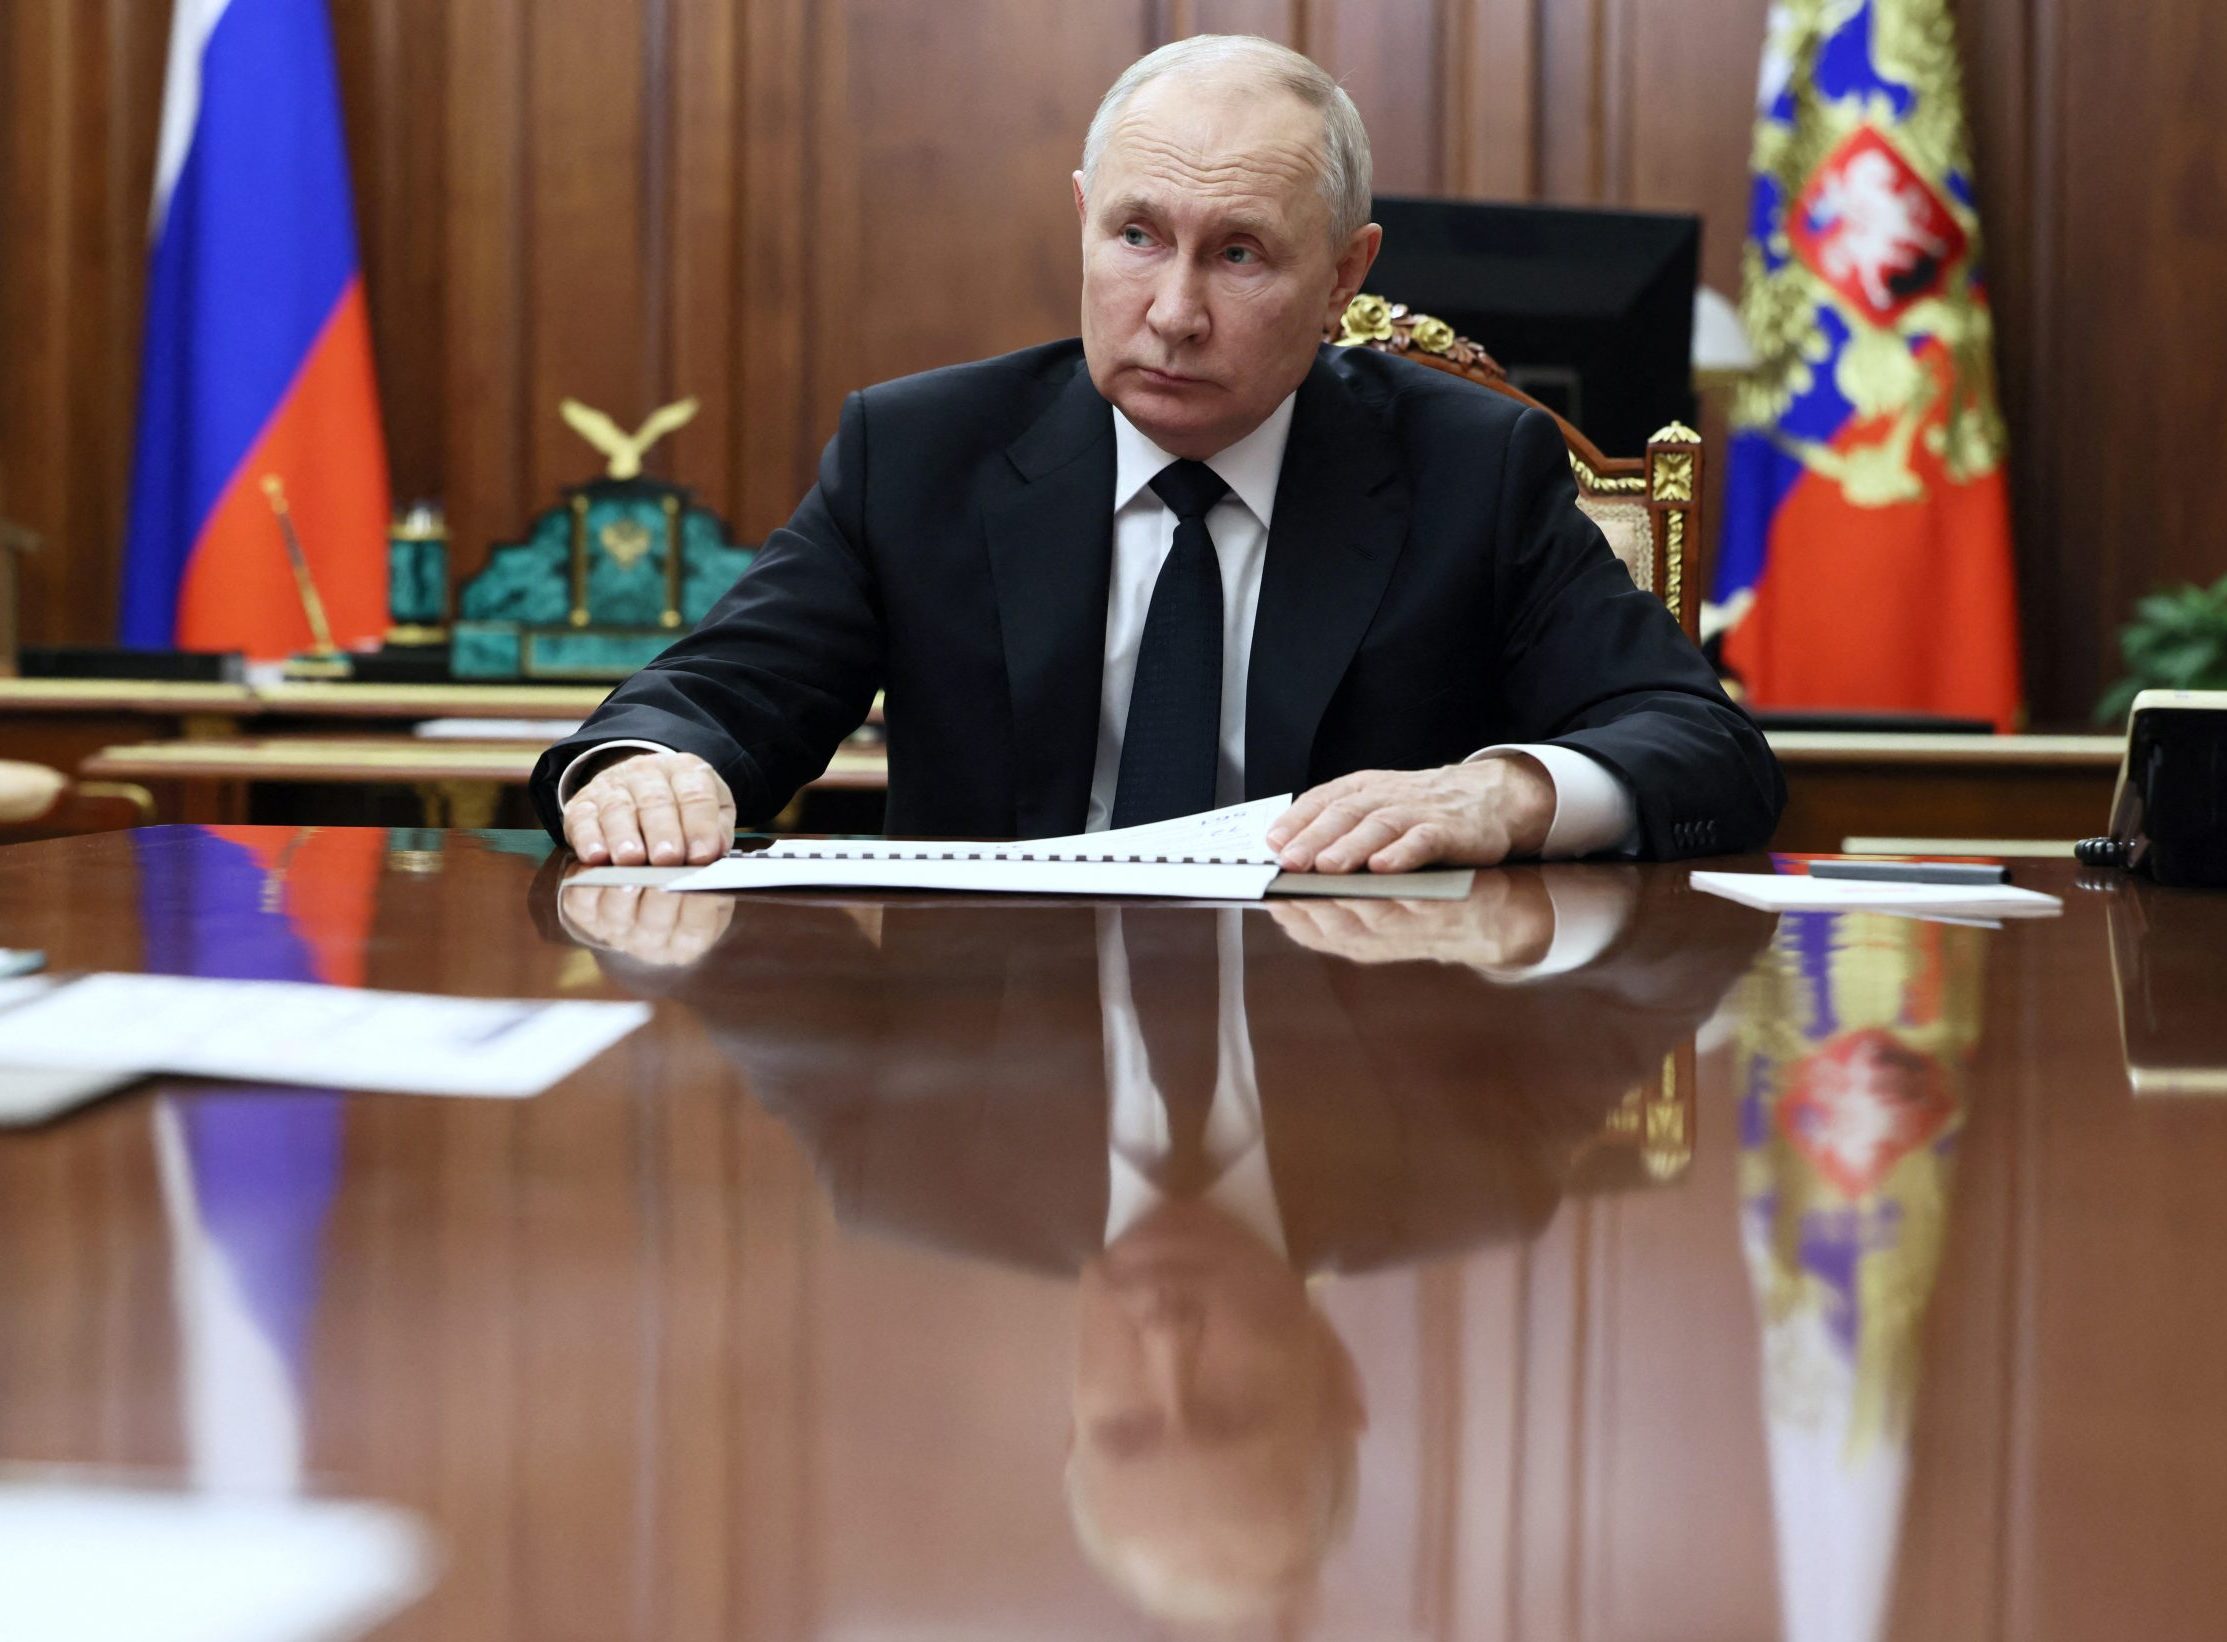 Geopolitics and Russia's peace initiatives - Asia Times